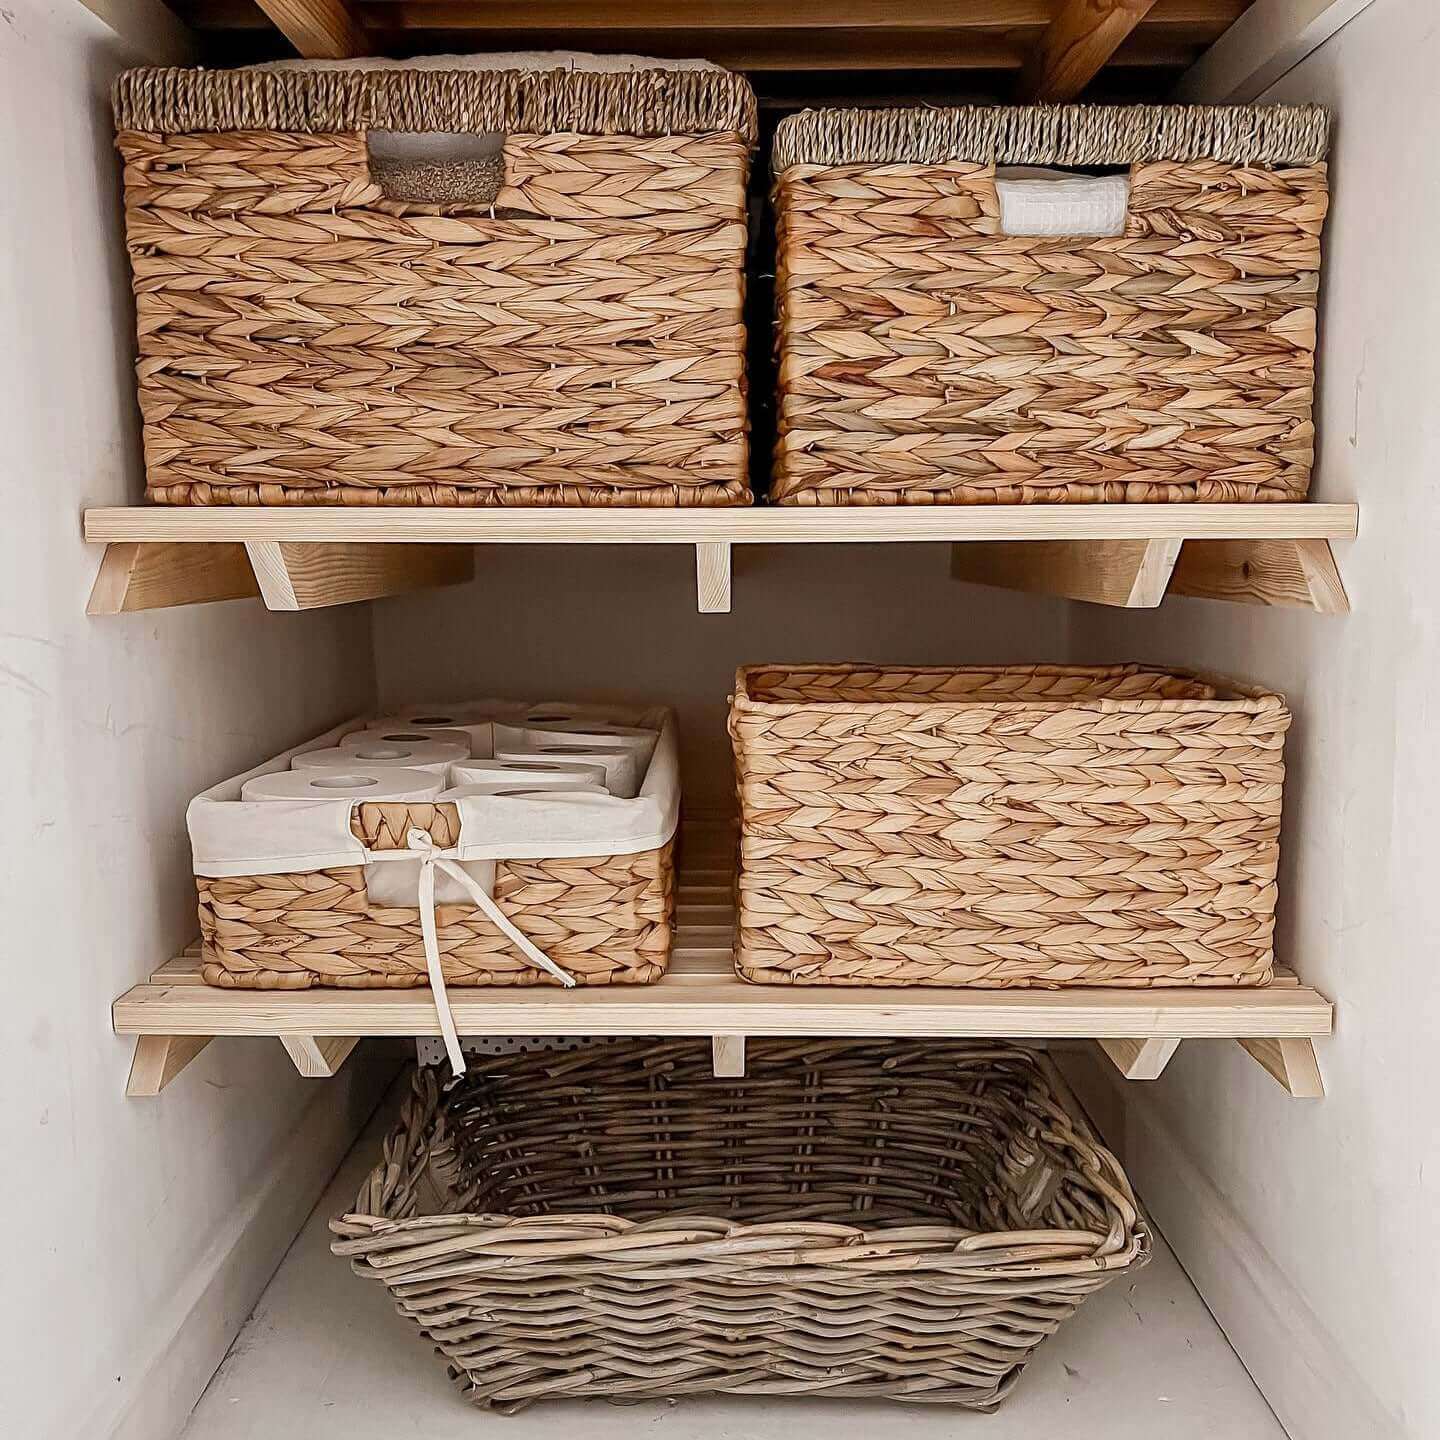 Airing Cupboard Wooden Slatted Shelves - 55 cm by 80 cm